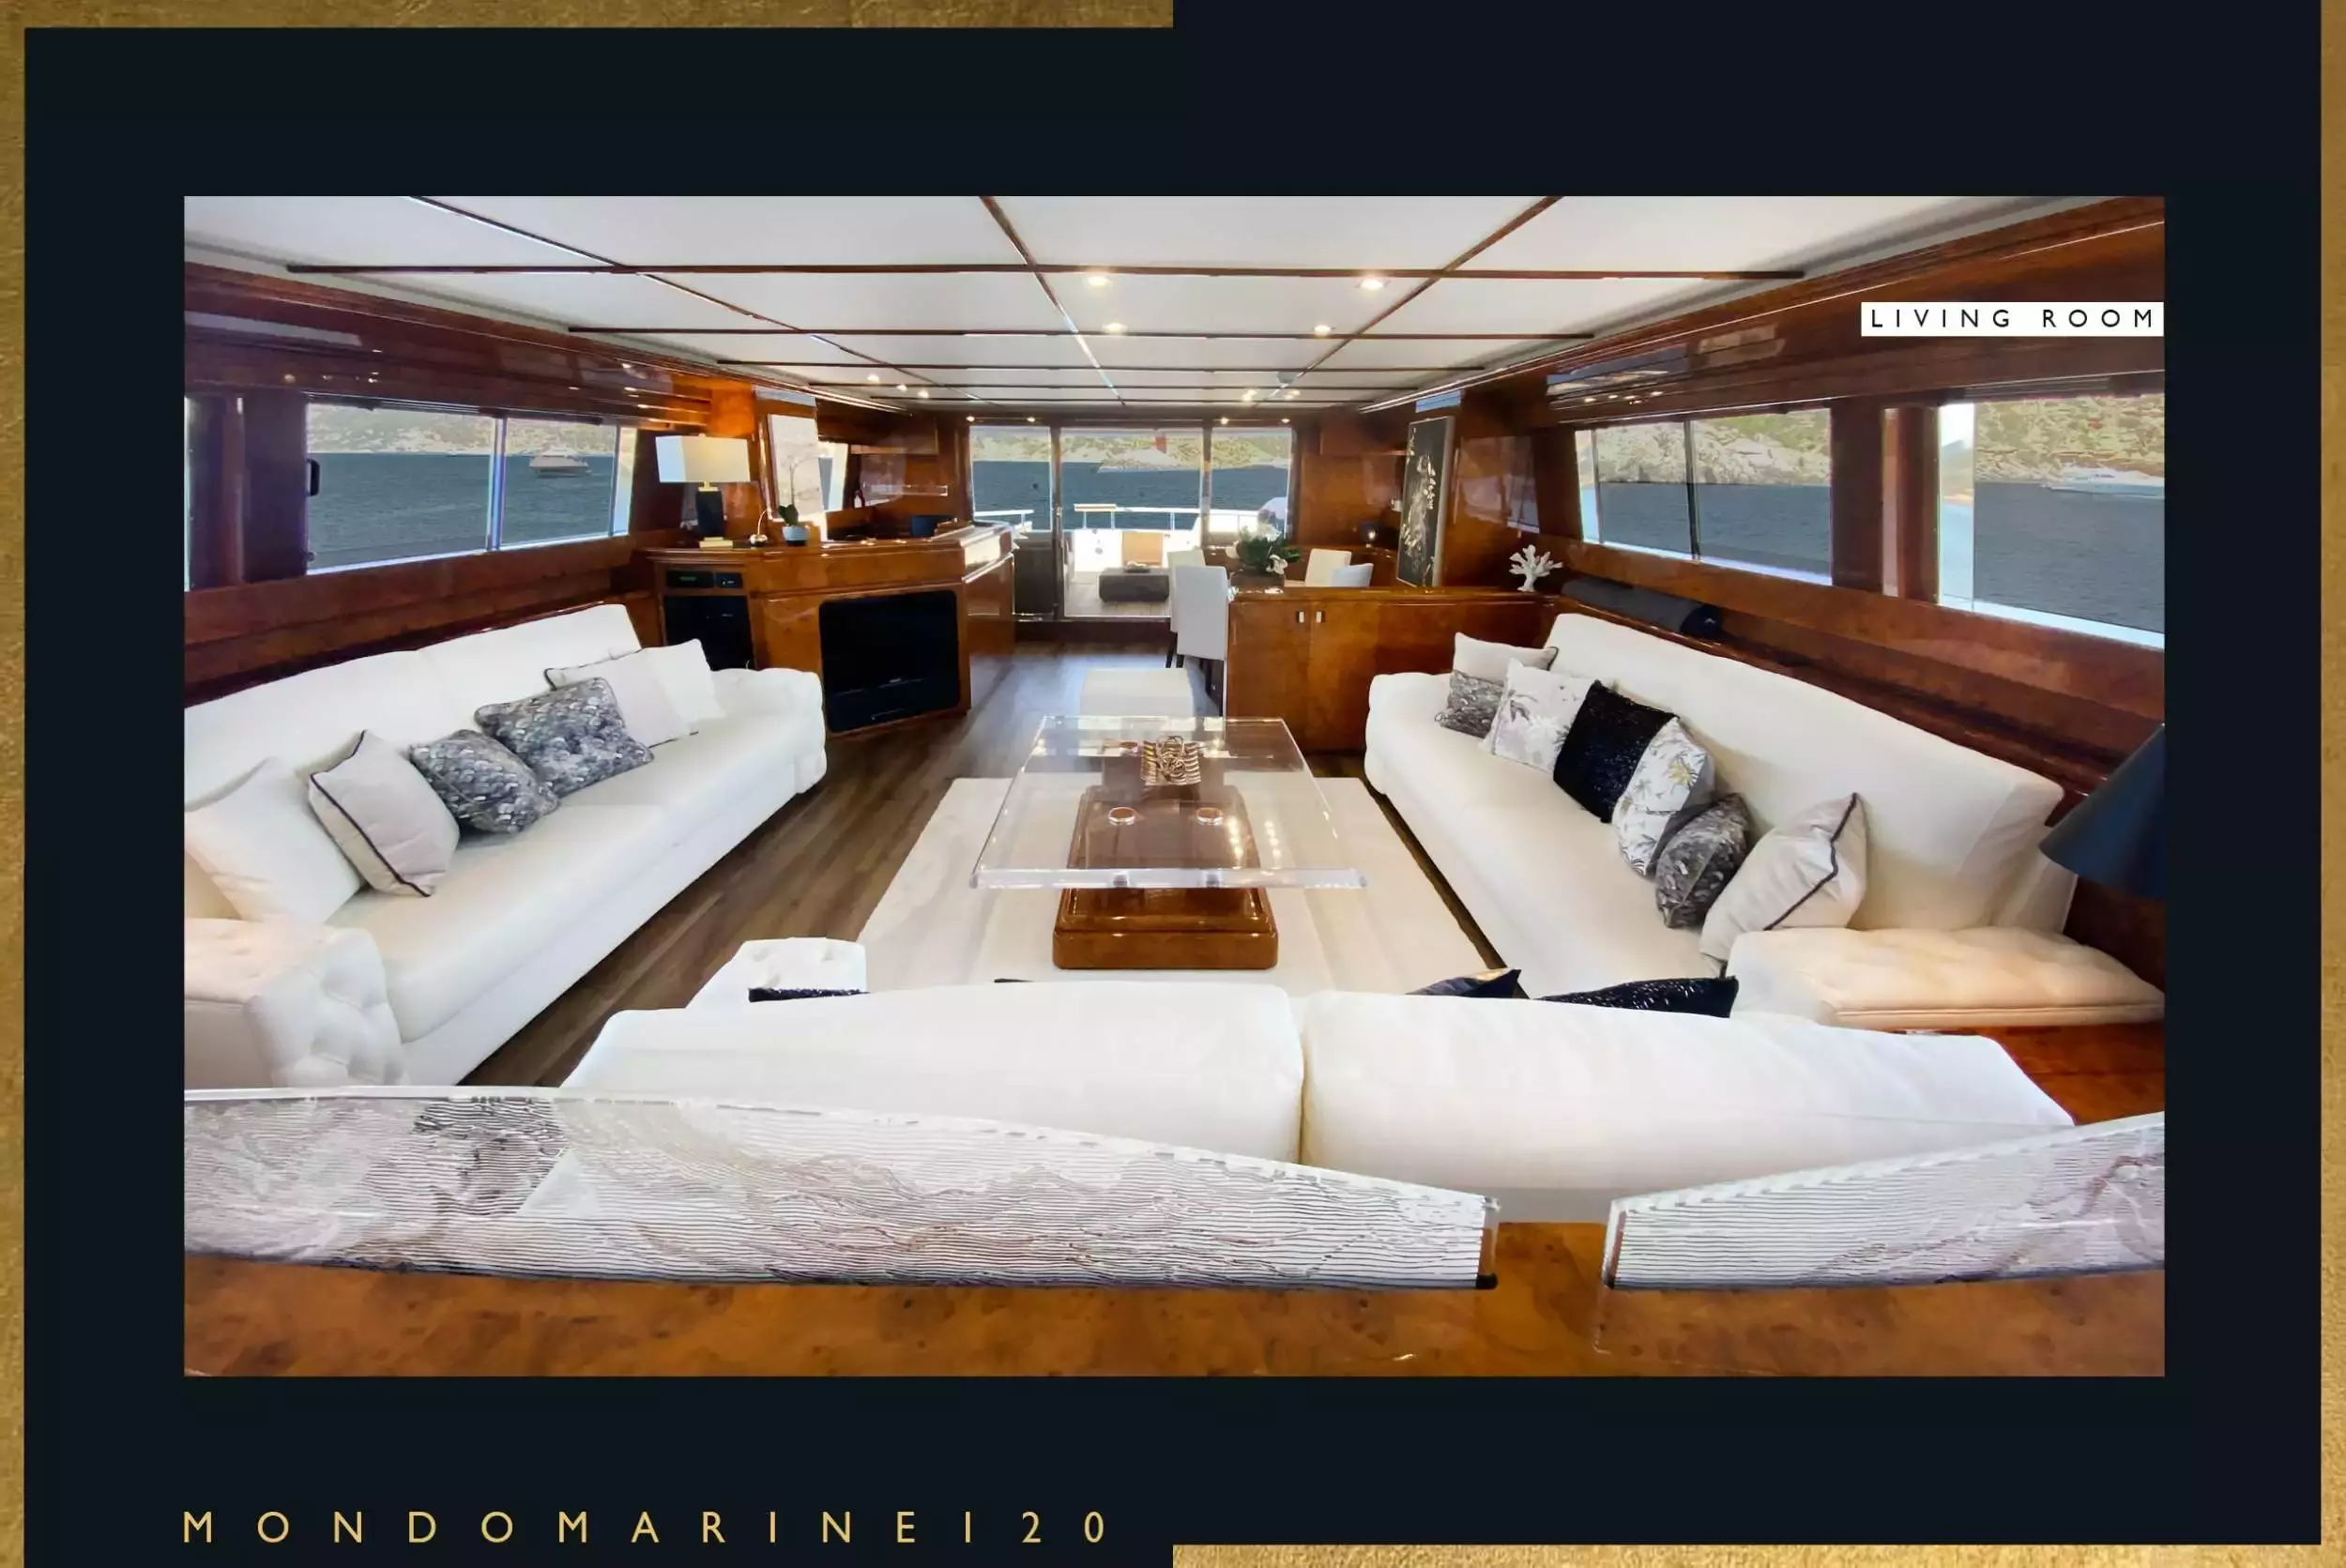 Paula III by Mondomarine - Special Offer for a private Motor Yacht Charter in Mallorca with a crew